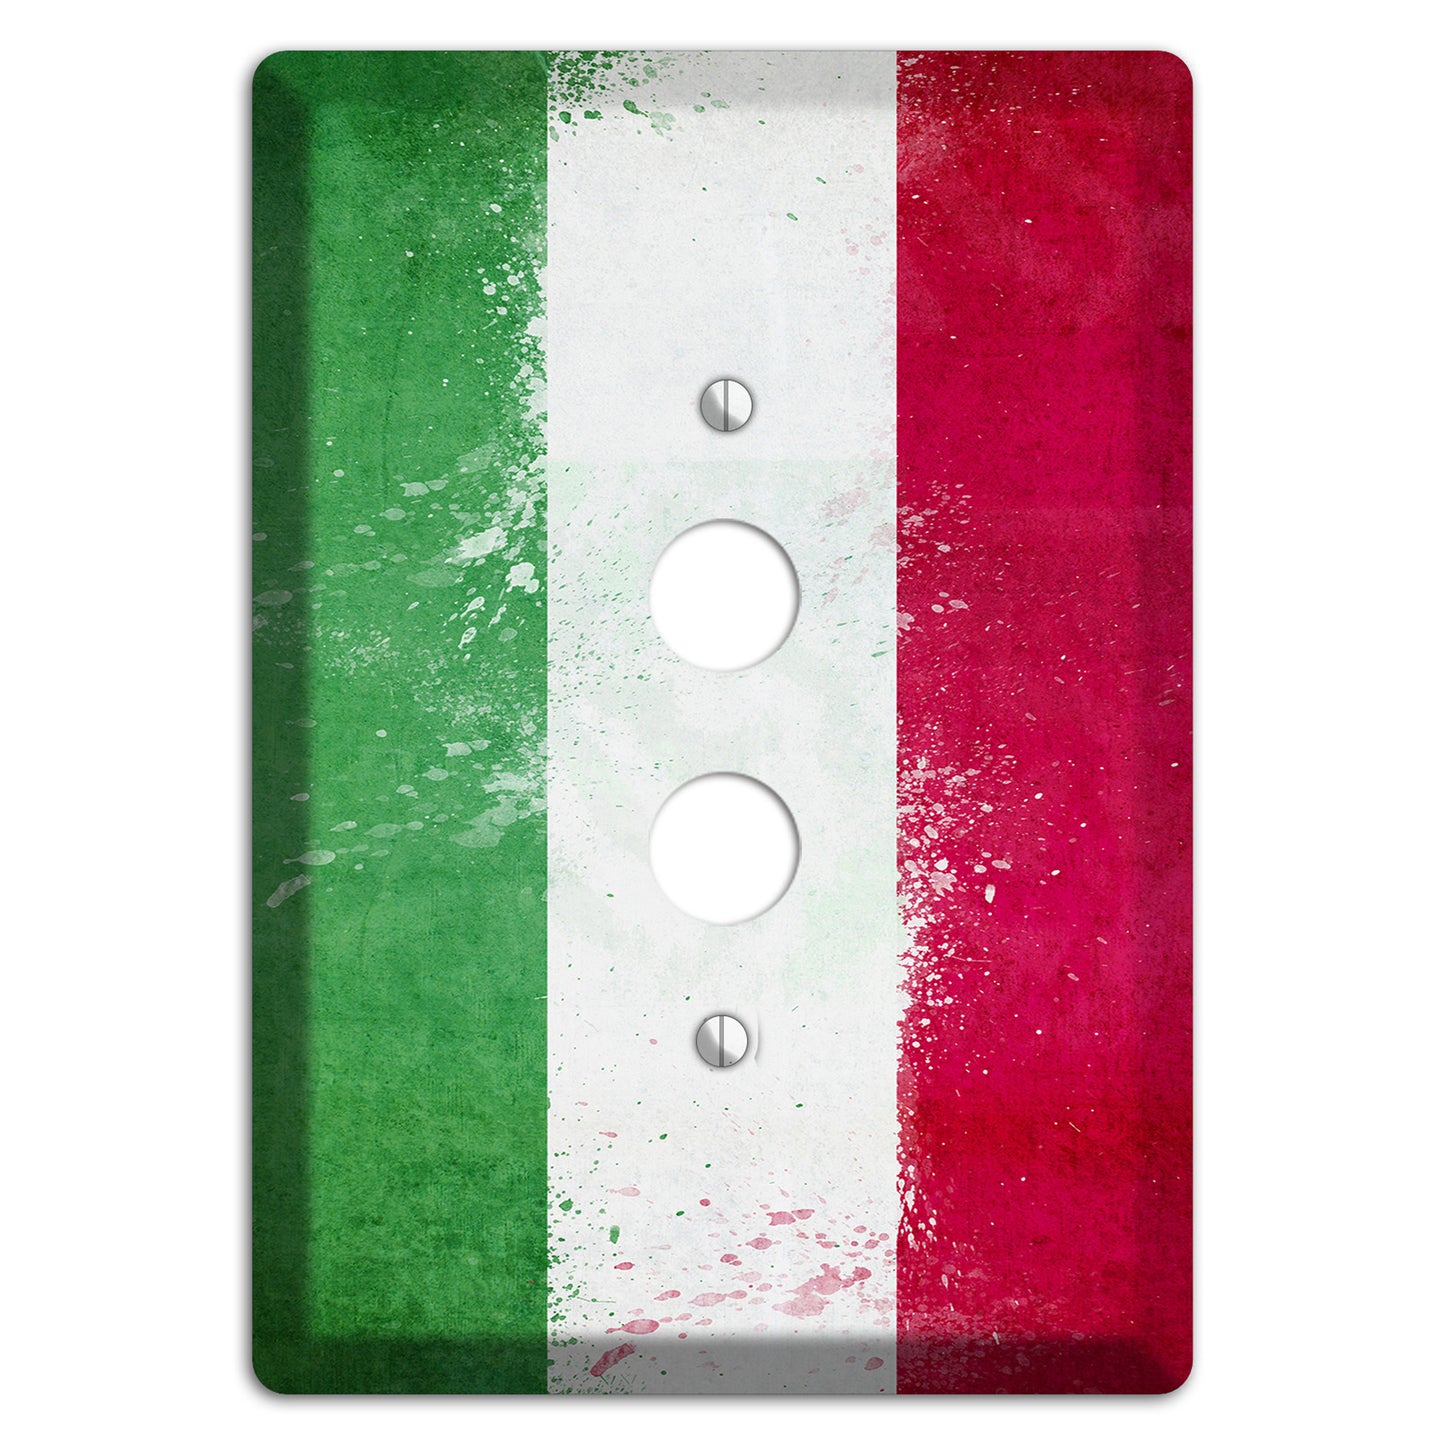 Hungary Cover Plates 1 Pushbutton Wallplate